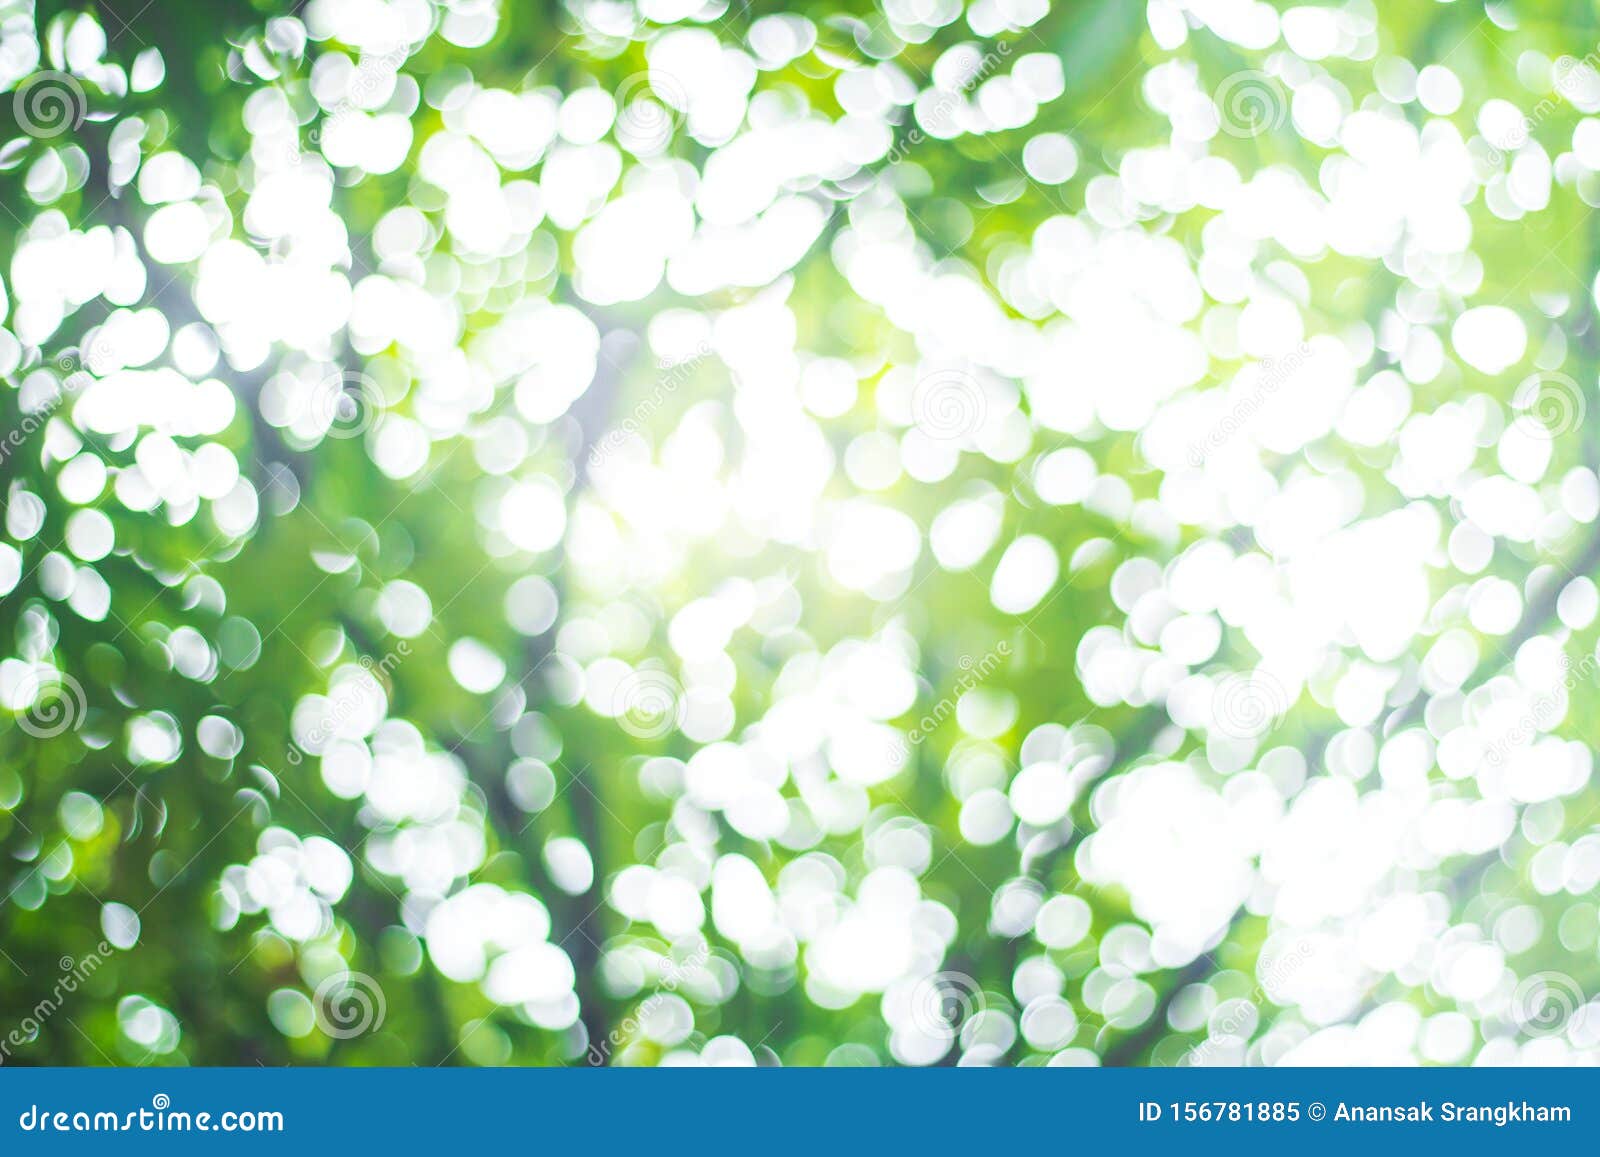 Abstract Green Nature Blur Background and Sunlight Stock Image - Image of  shiny, beautiful: 156781885